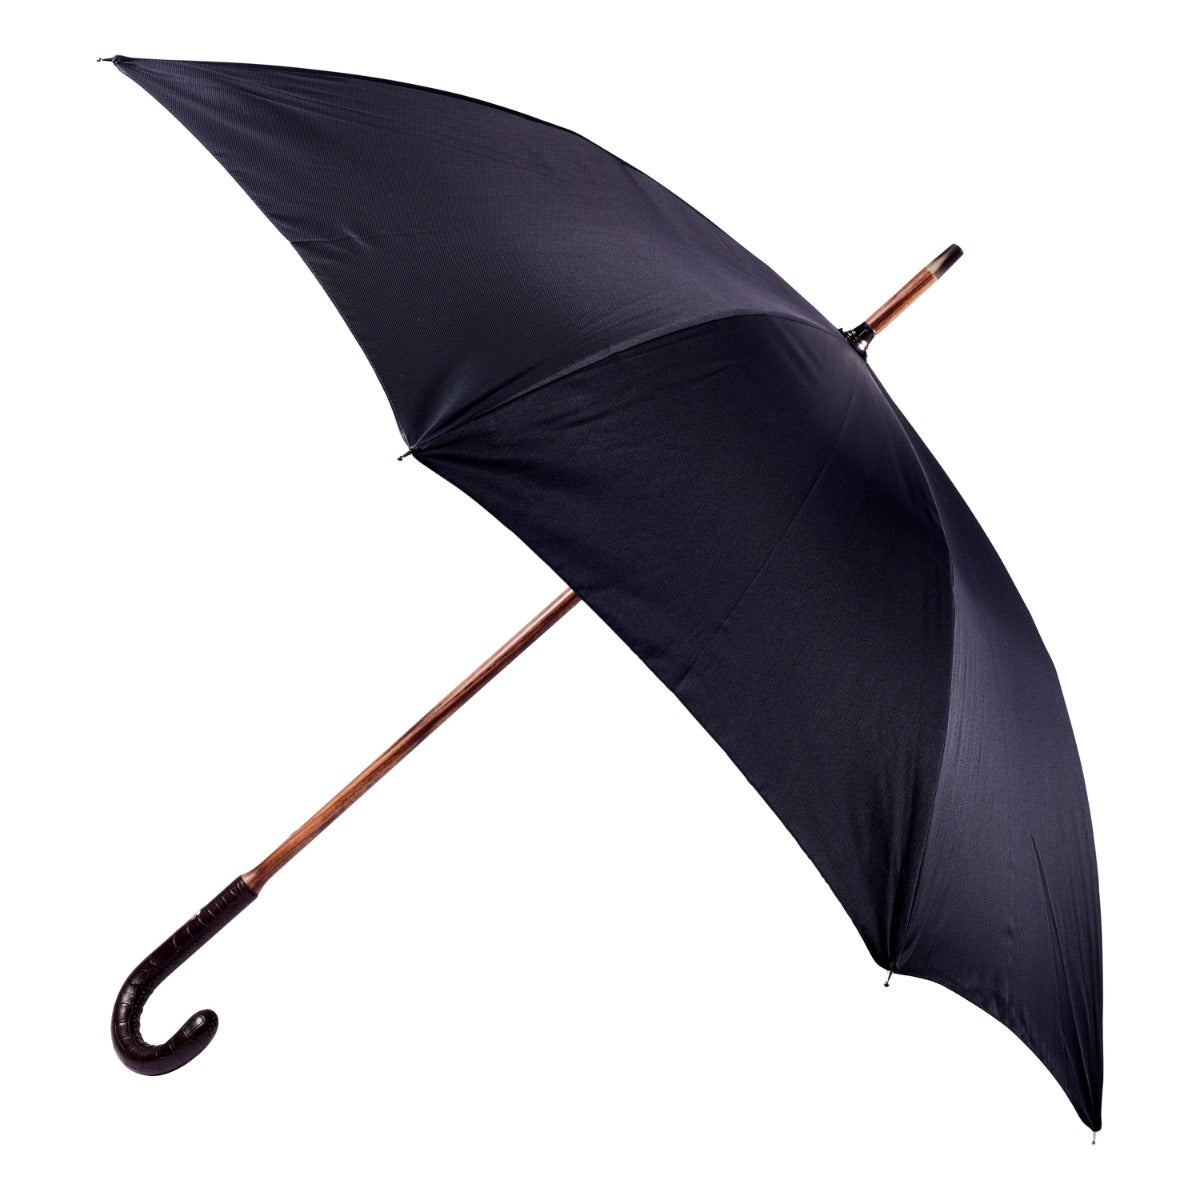 A KirbyAllison.com Brown Alligator Solid Stick umbrella with a wooden handle on a white background.